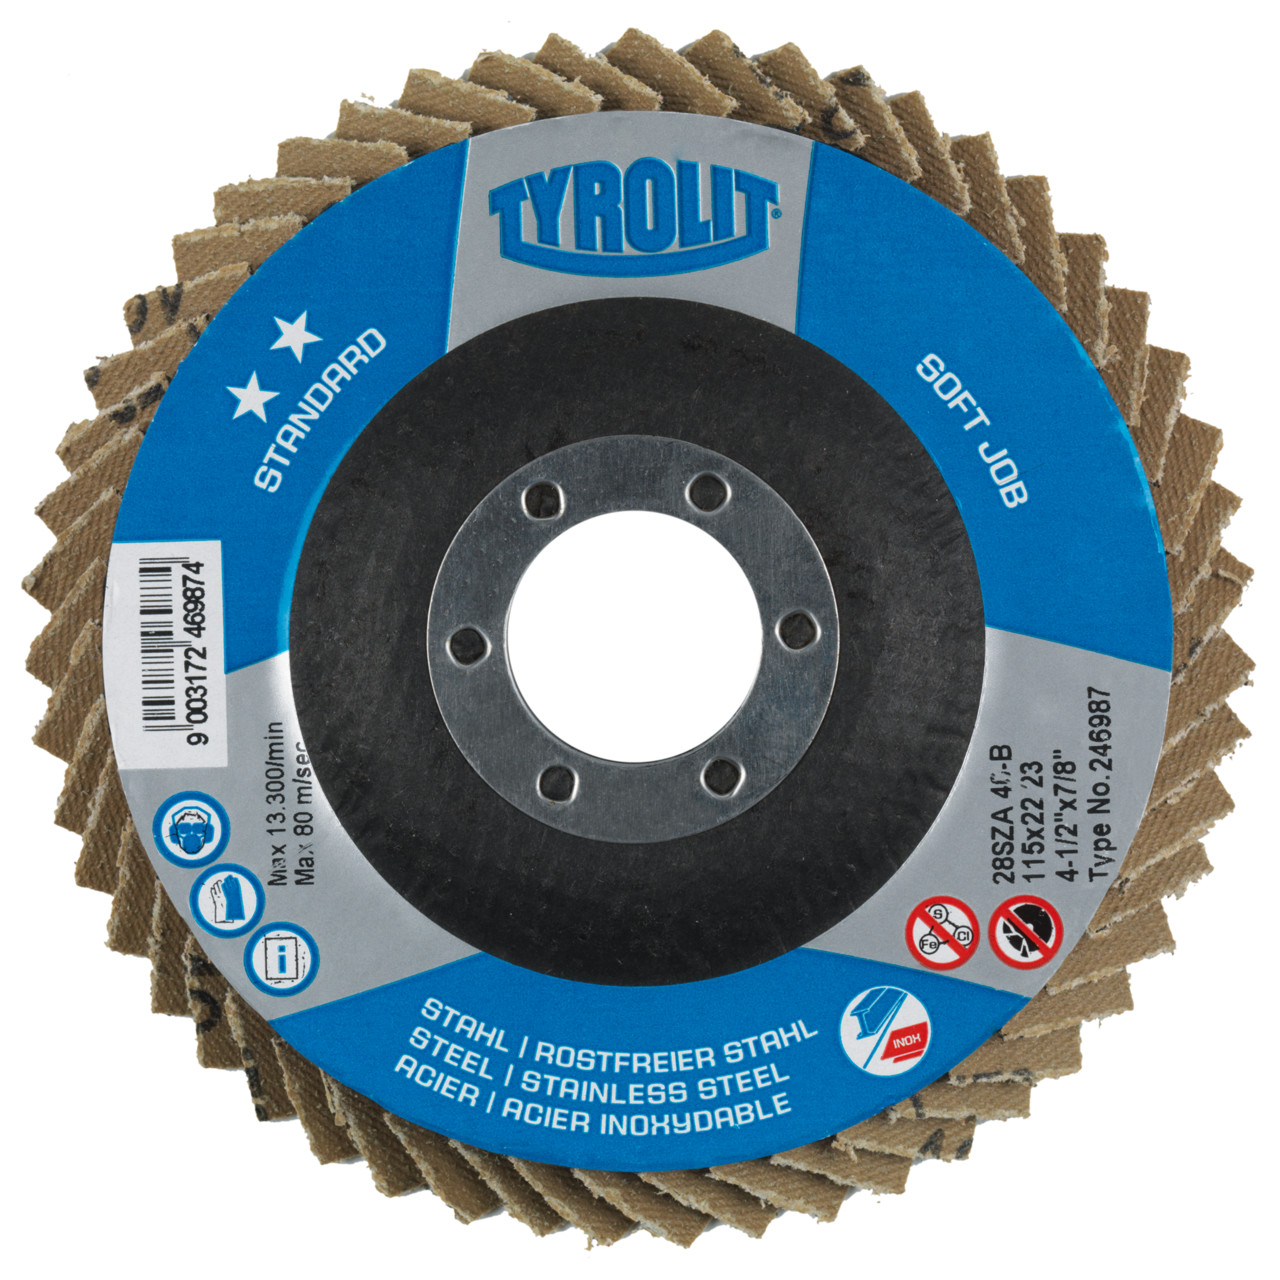 Tyrolit SOFTJOB DxH 115x22.23 2in1 for steel and stainless steel, P40, shape: 28S - straight version (SOFTJOB flap disc), Art. 246987